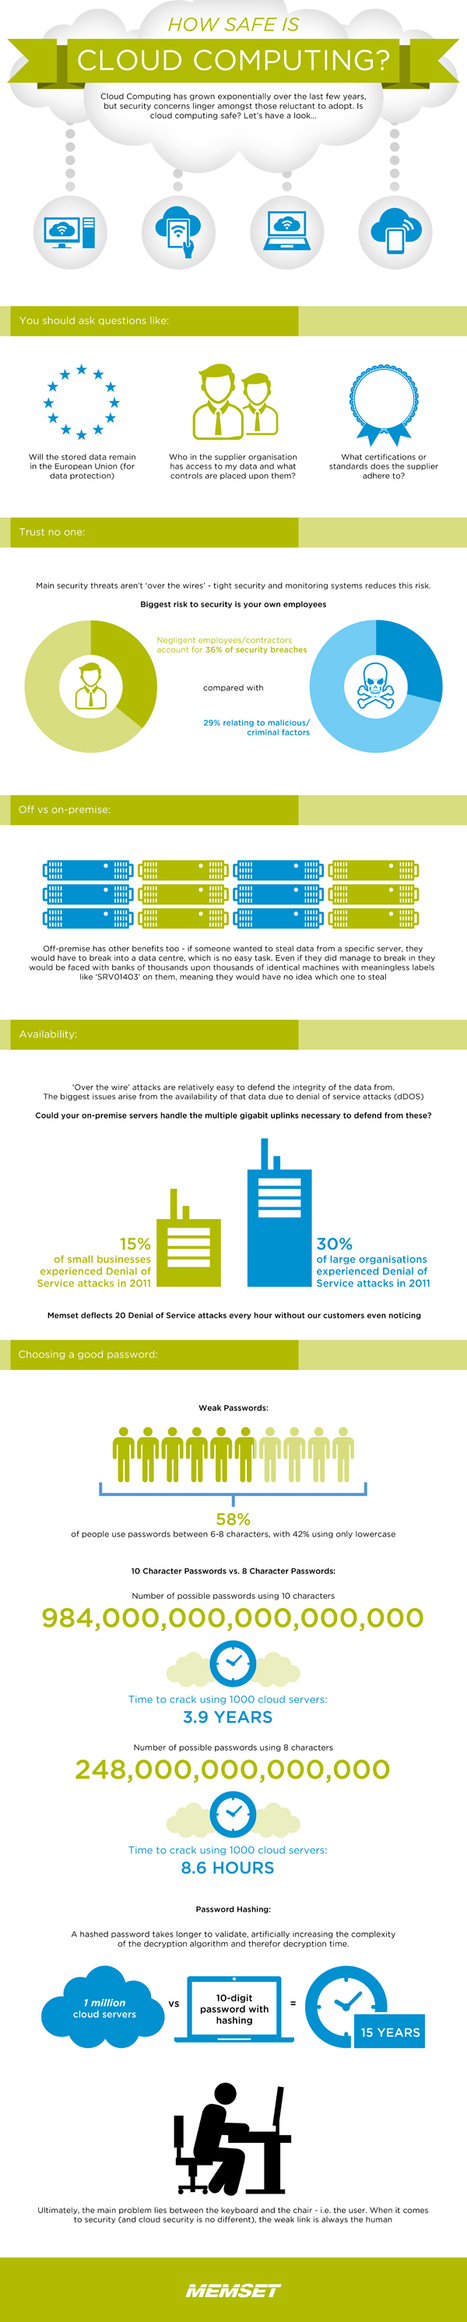 INFOGRAPHIC: How Safe is The Cloud? | Didactics and Technology in Education | Scoop.it